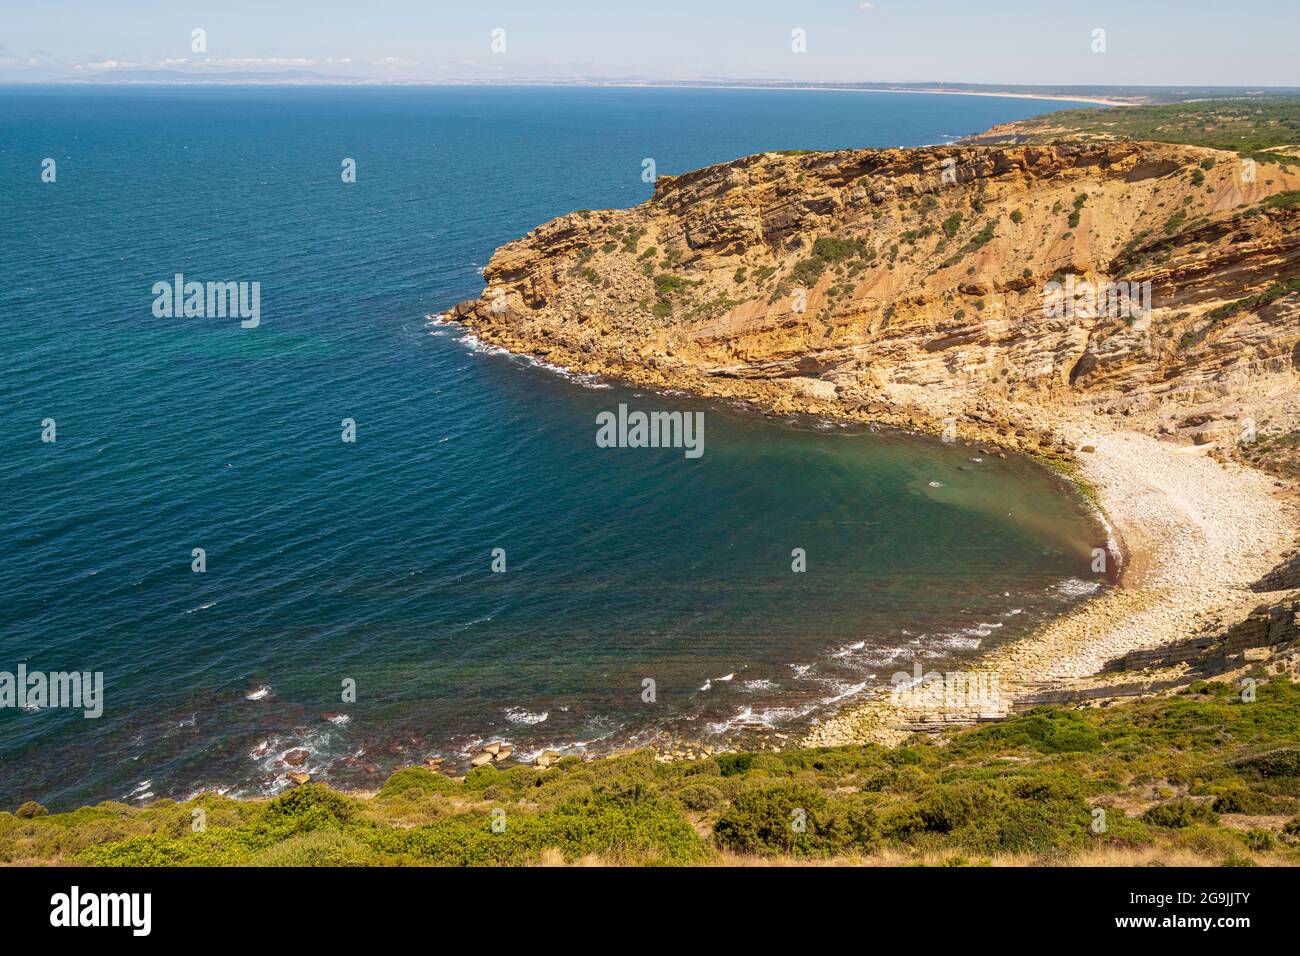 Cabo Espichel is a cape situated on the western coast of the civil parish of Castelo, municipality of Sesimbra, in the Portuguese district of Setúbal. Stock Photo